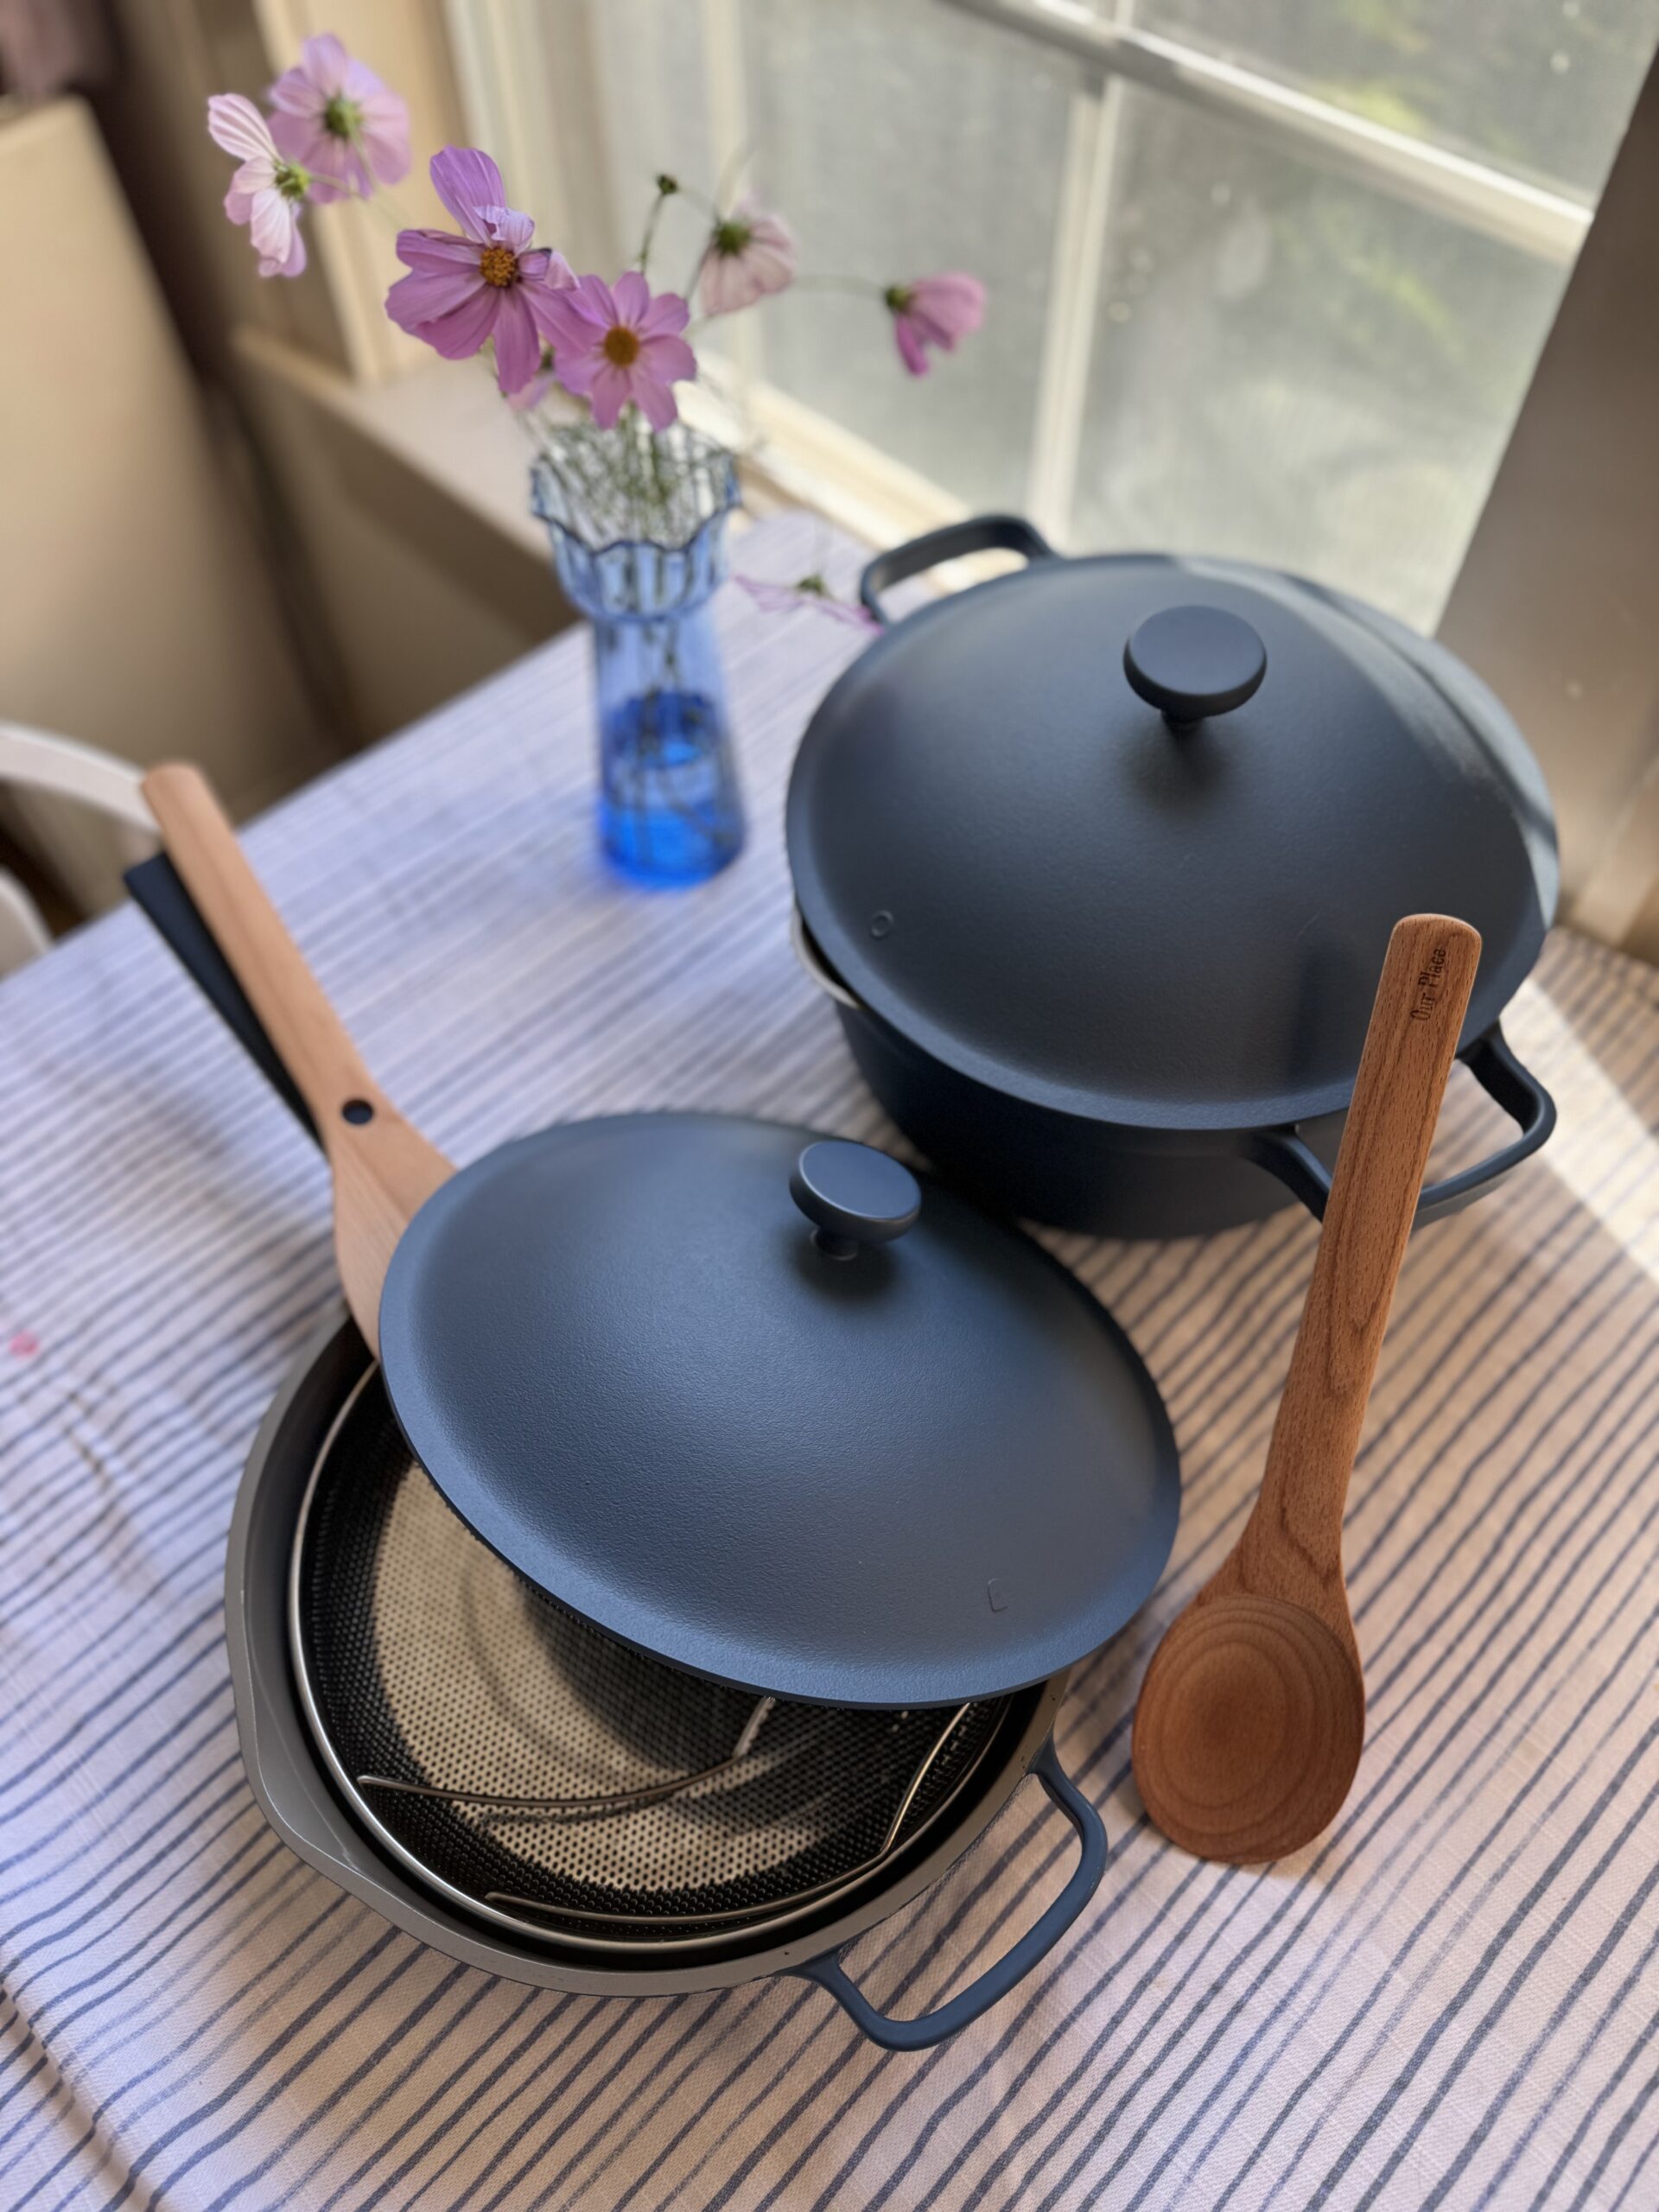 The Best Non-Toxic Cookware (Comparison Guide + Reviews!) - A Beautiful Mess